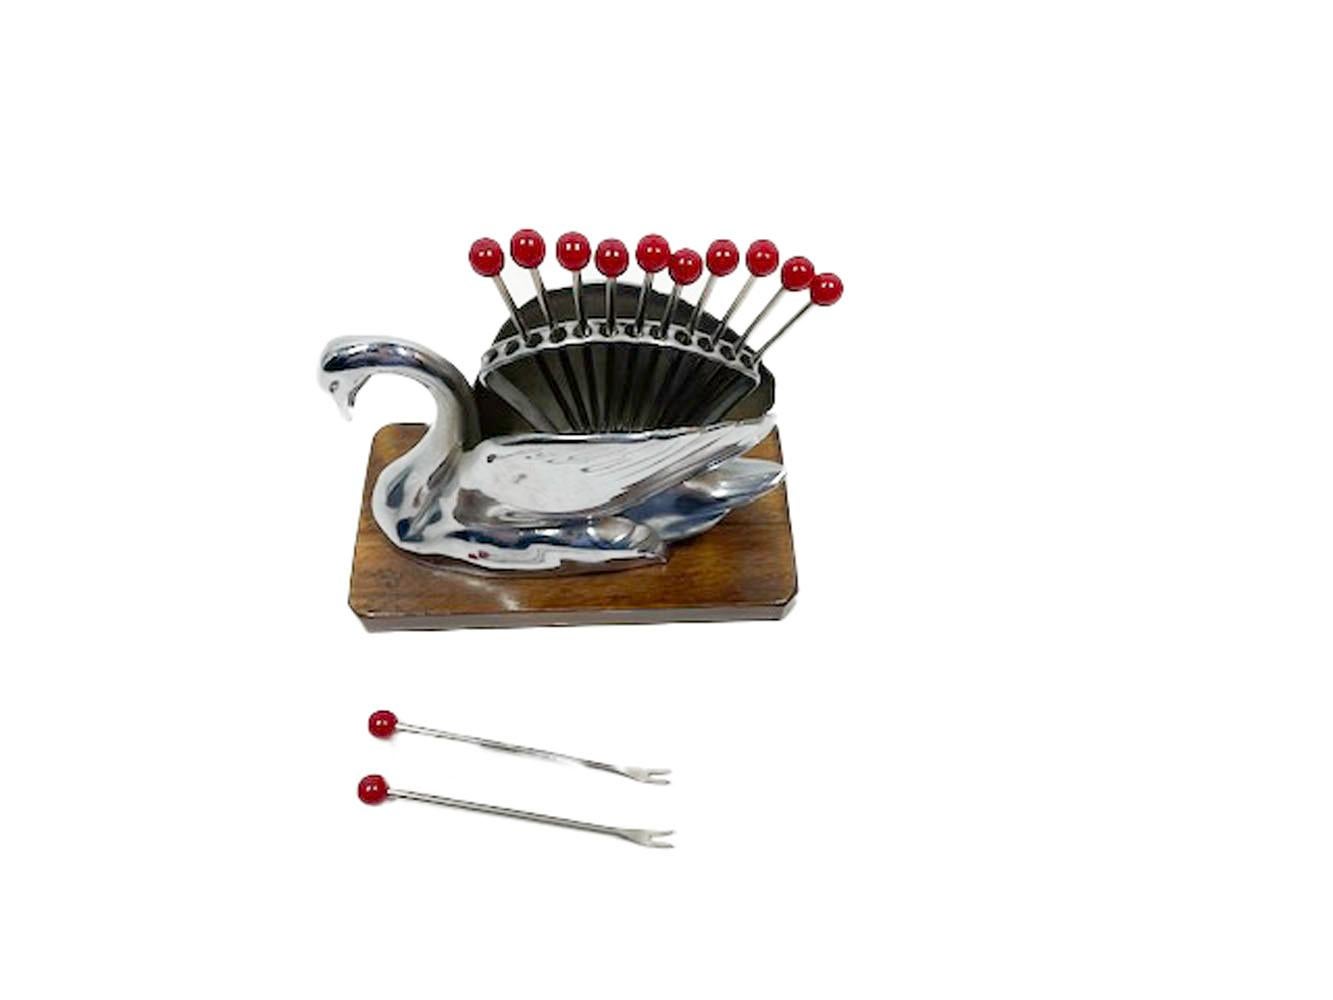 Art Deco chromed metal swan on rectangular wood base holding 12 forked chromed steel and cherry red Lucite cocktail picks between its wings.